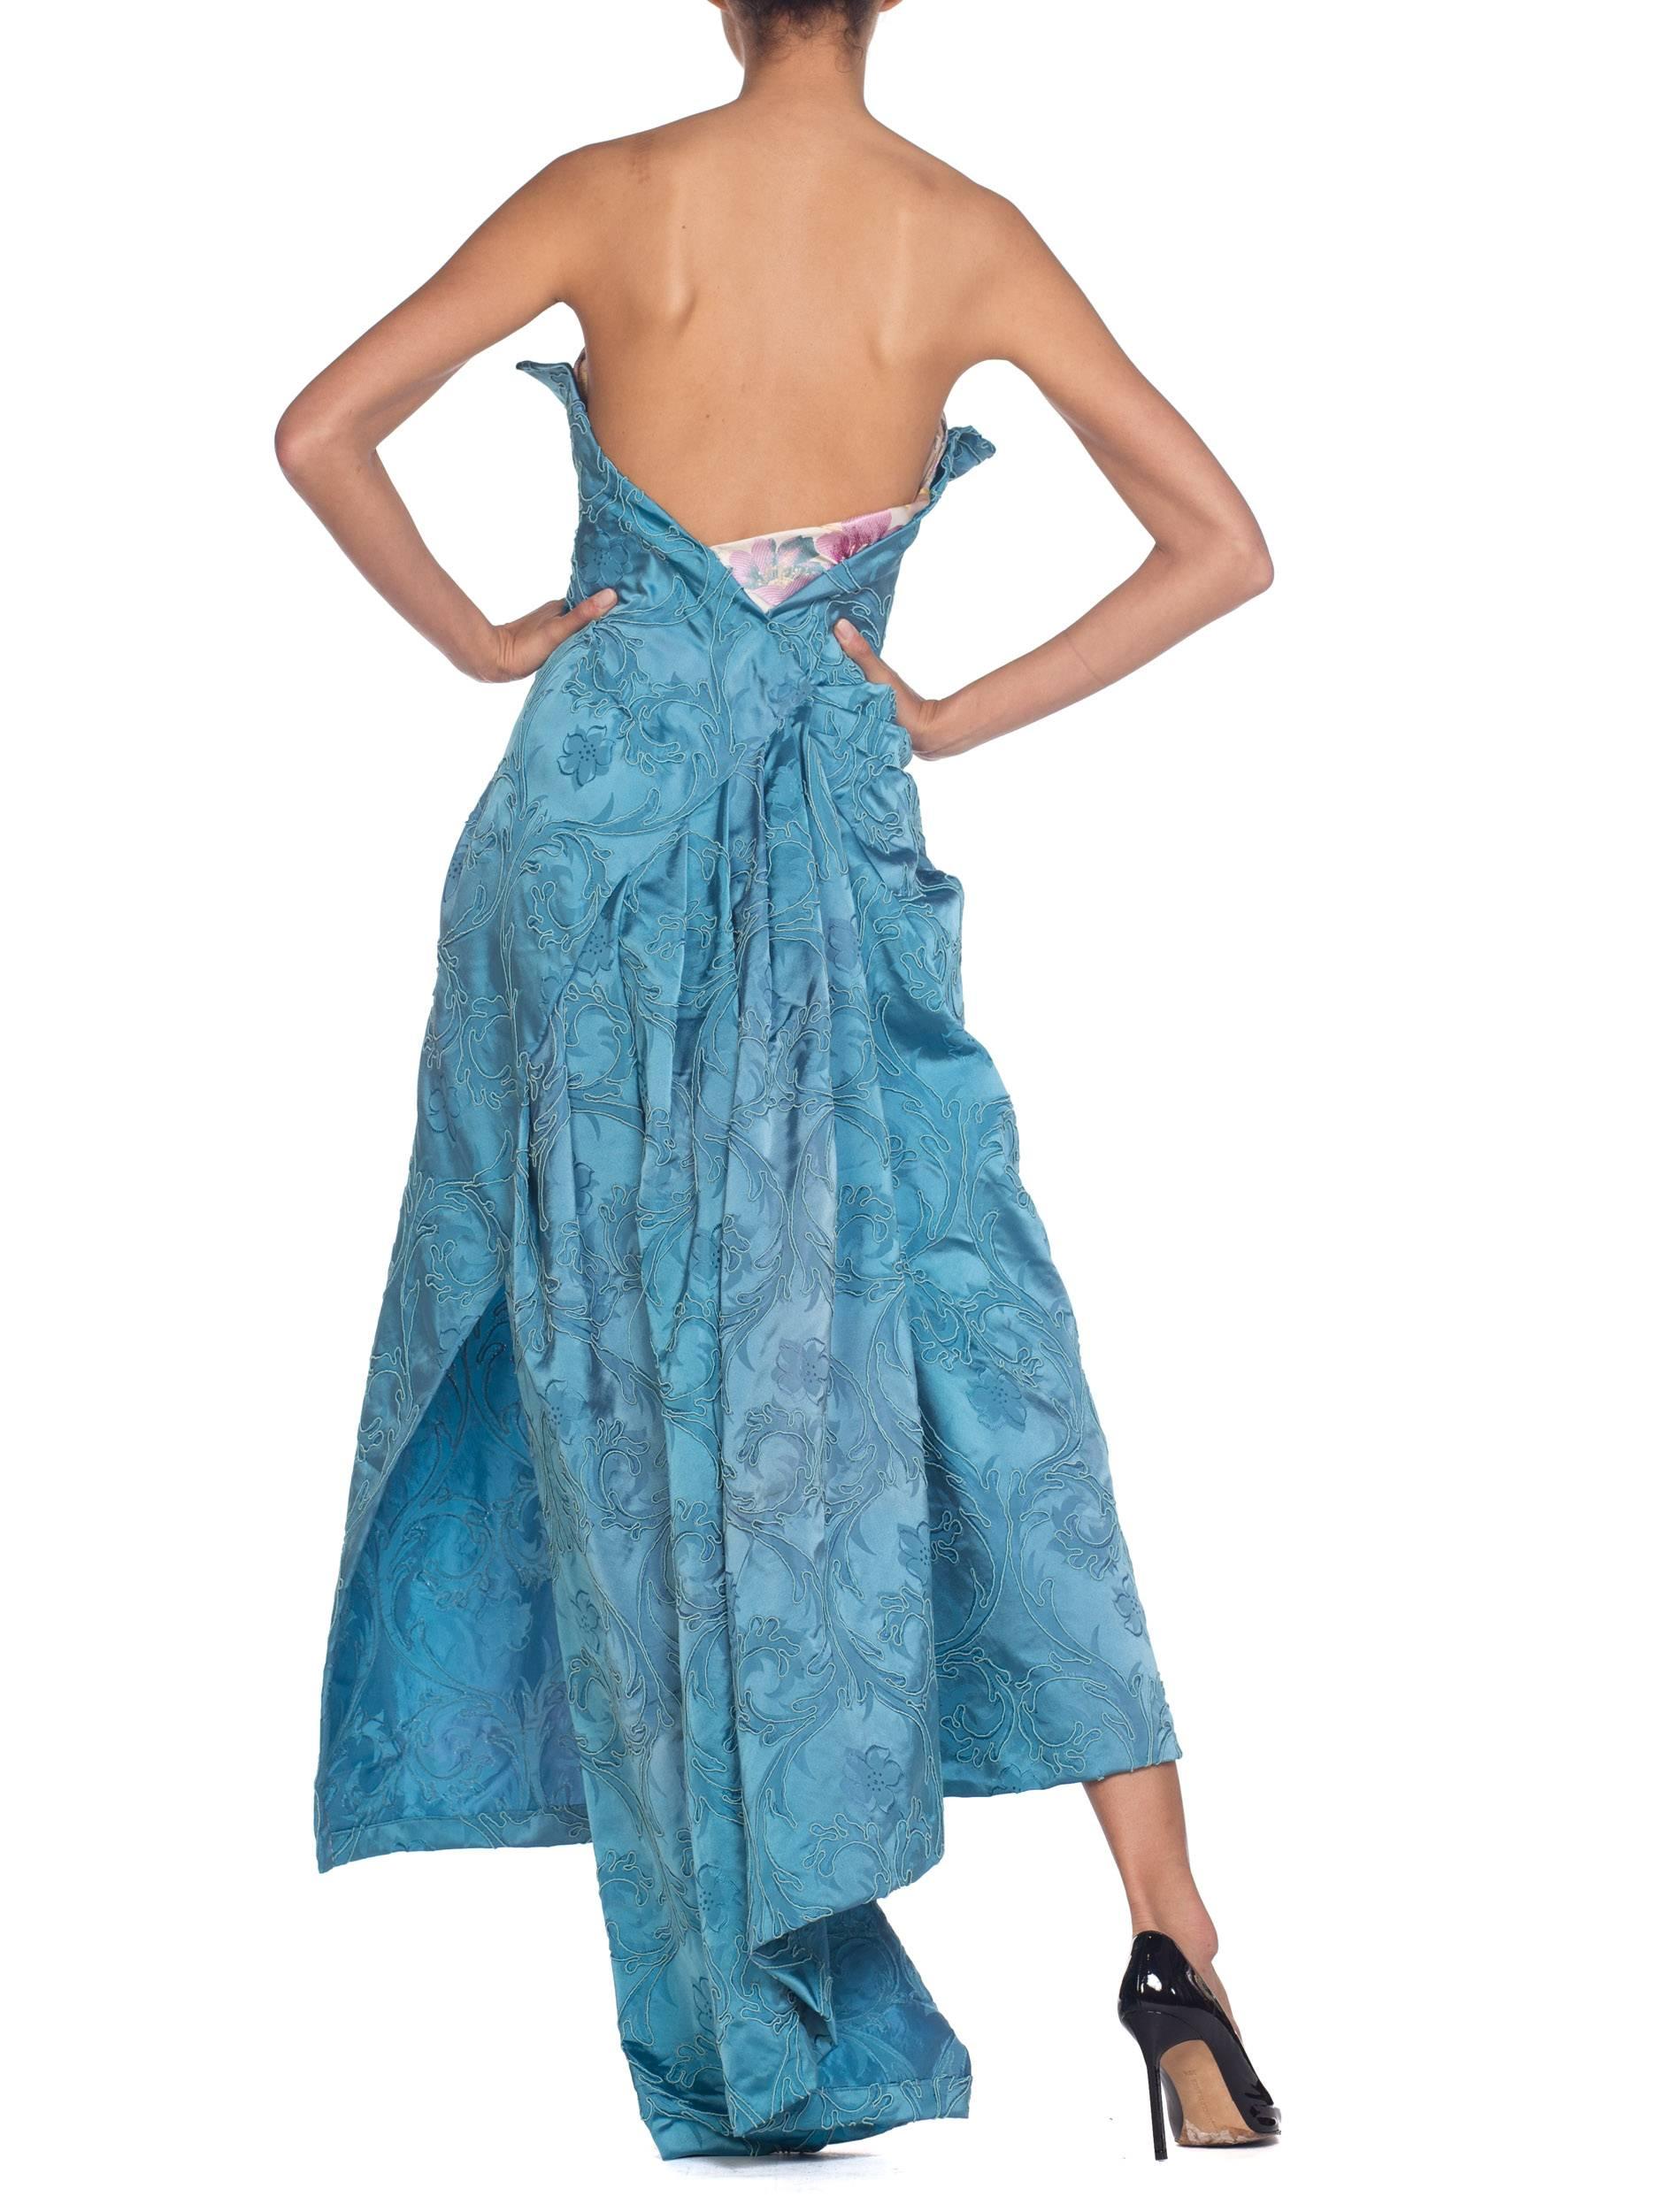 Morphew Strapless Gown with Boning Made from 1950s Blue Satin Demask  2